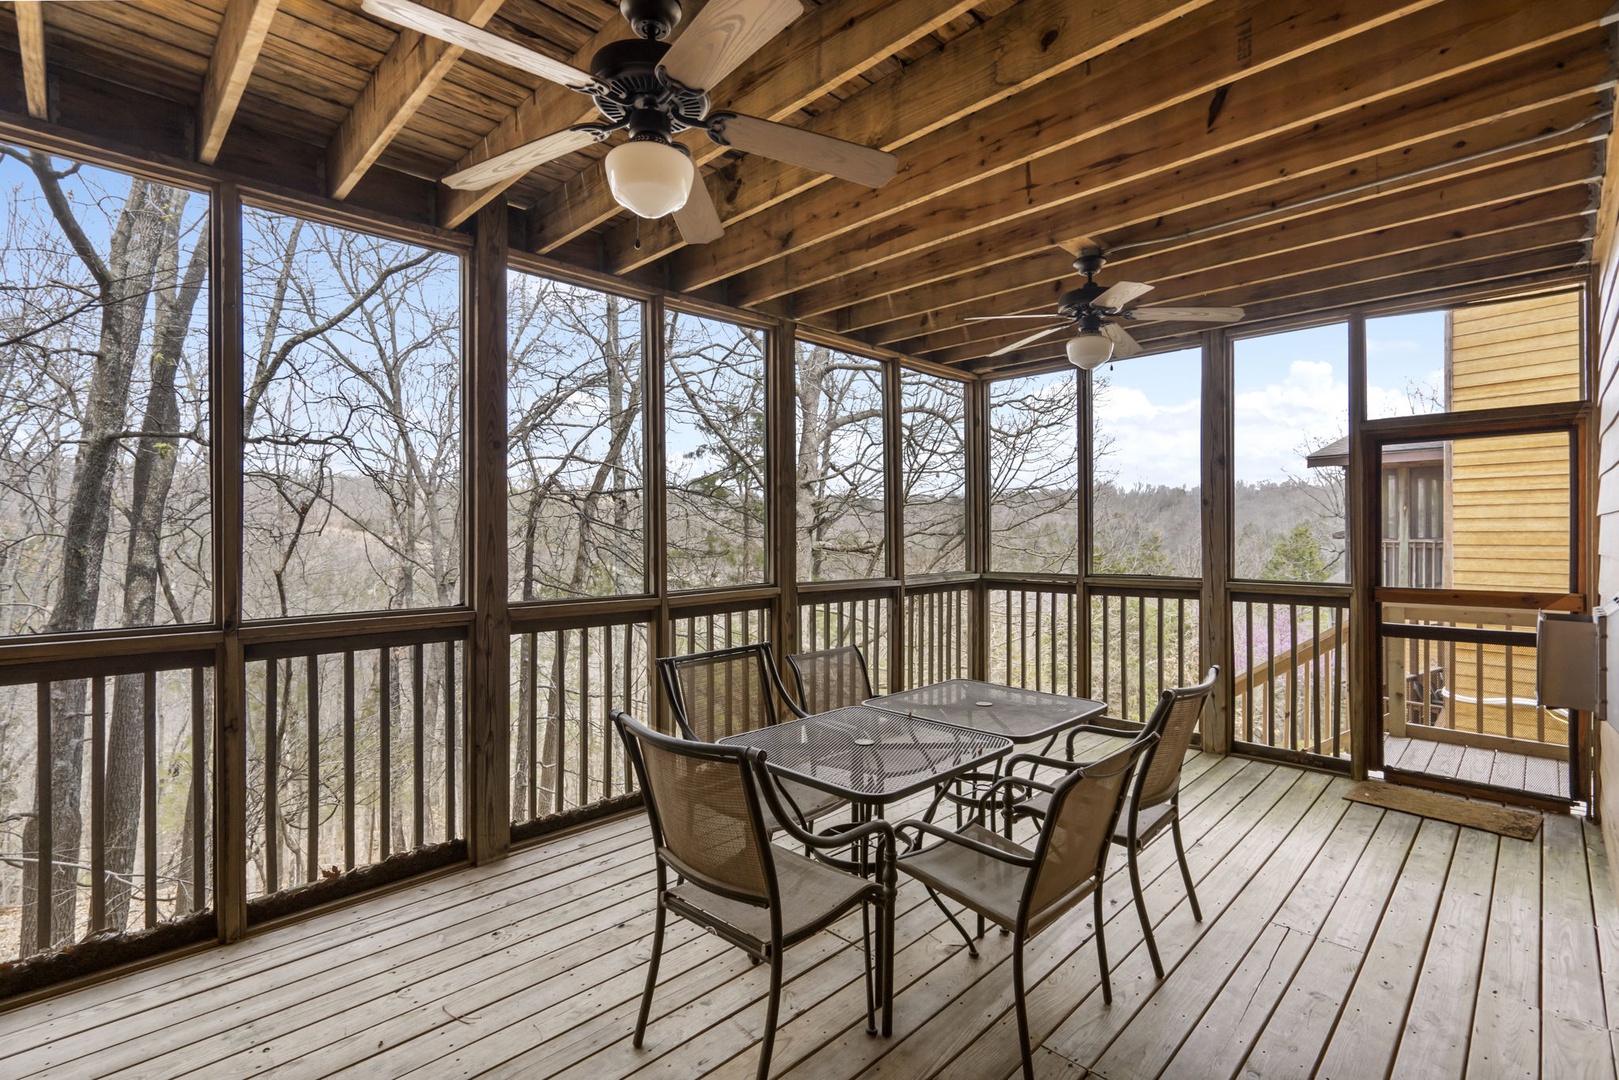 Lounge the day away or dine alfresco on the lower-level screened deck